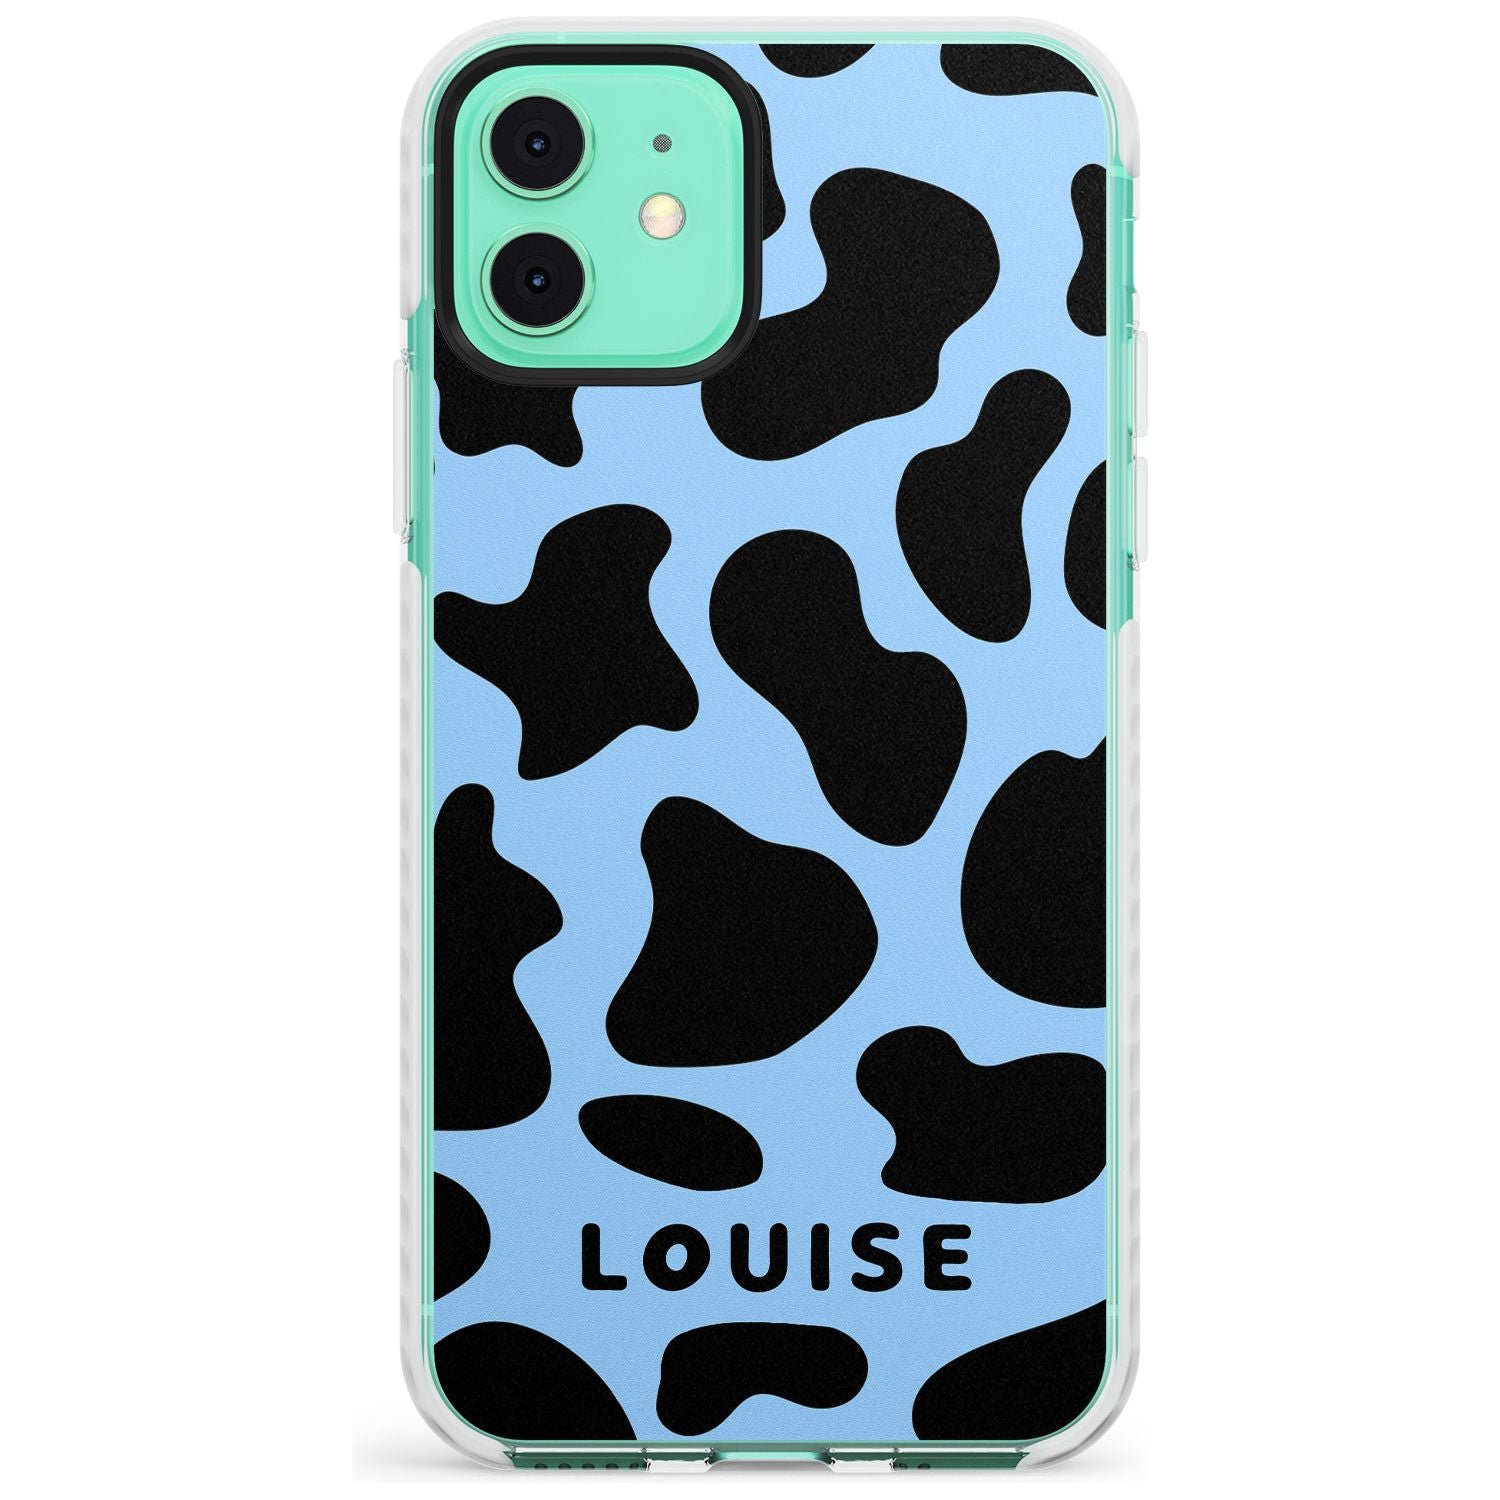 Personalised Blue and Black Cow Print Impact Phone Case for iPhone 11